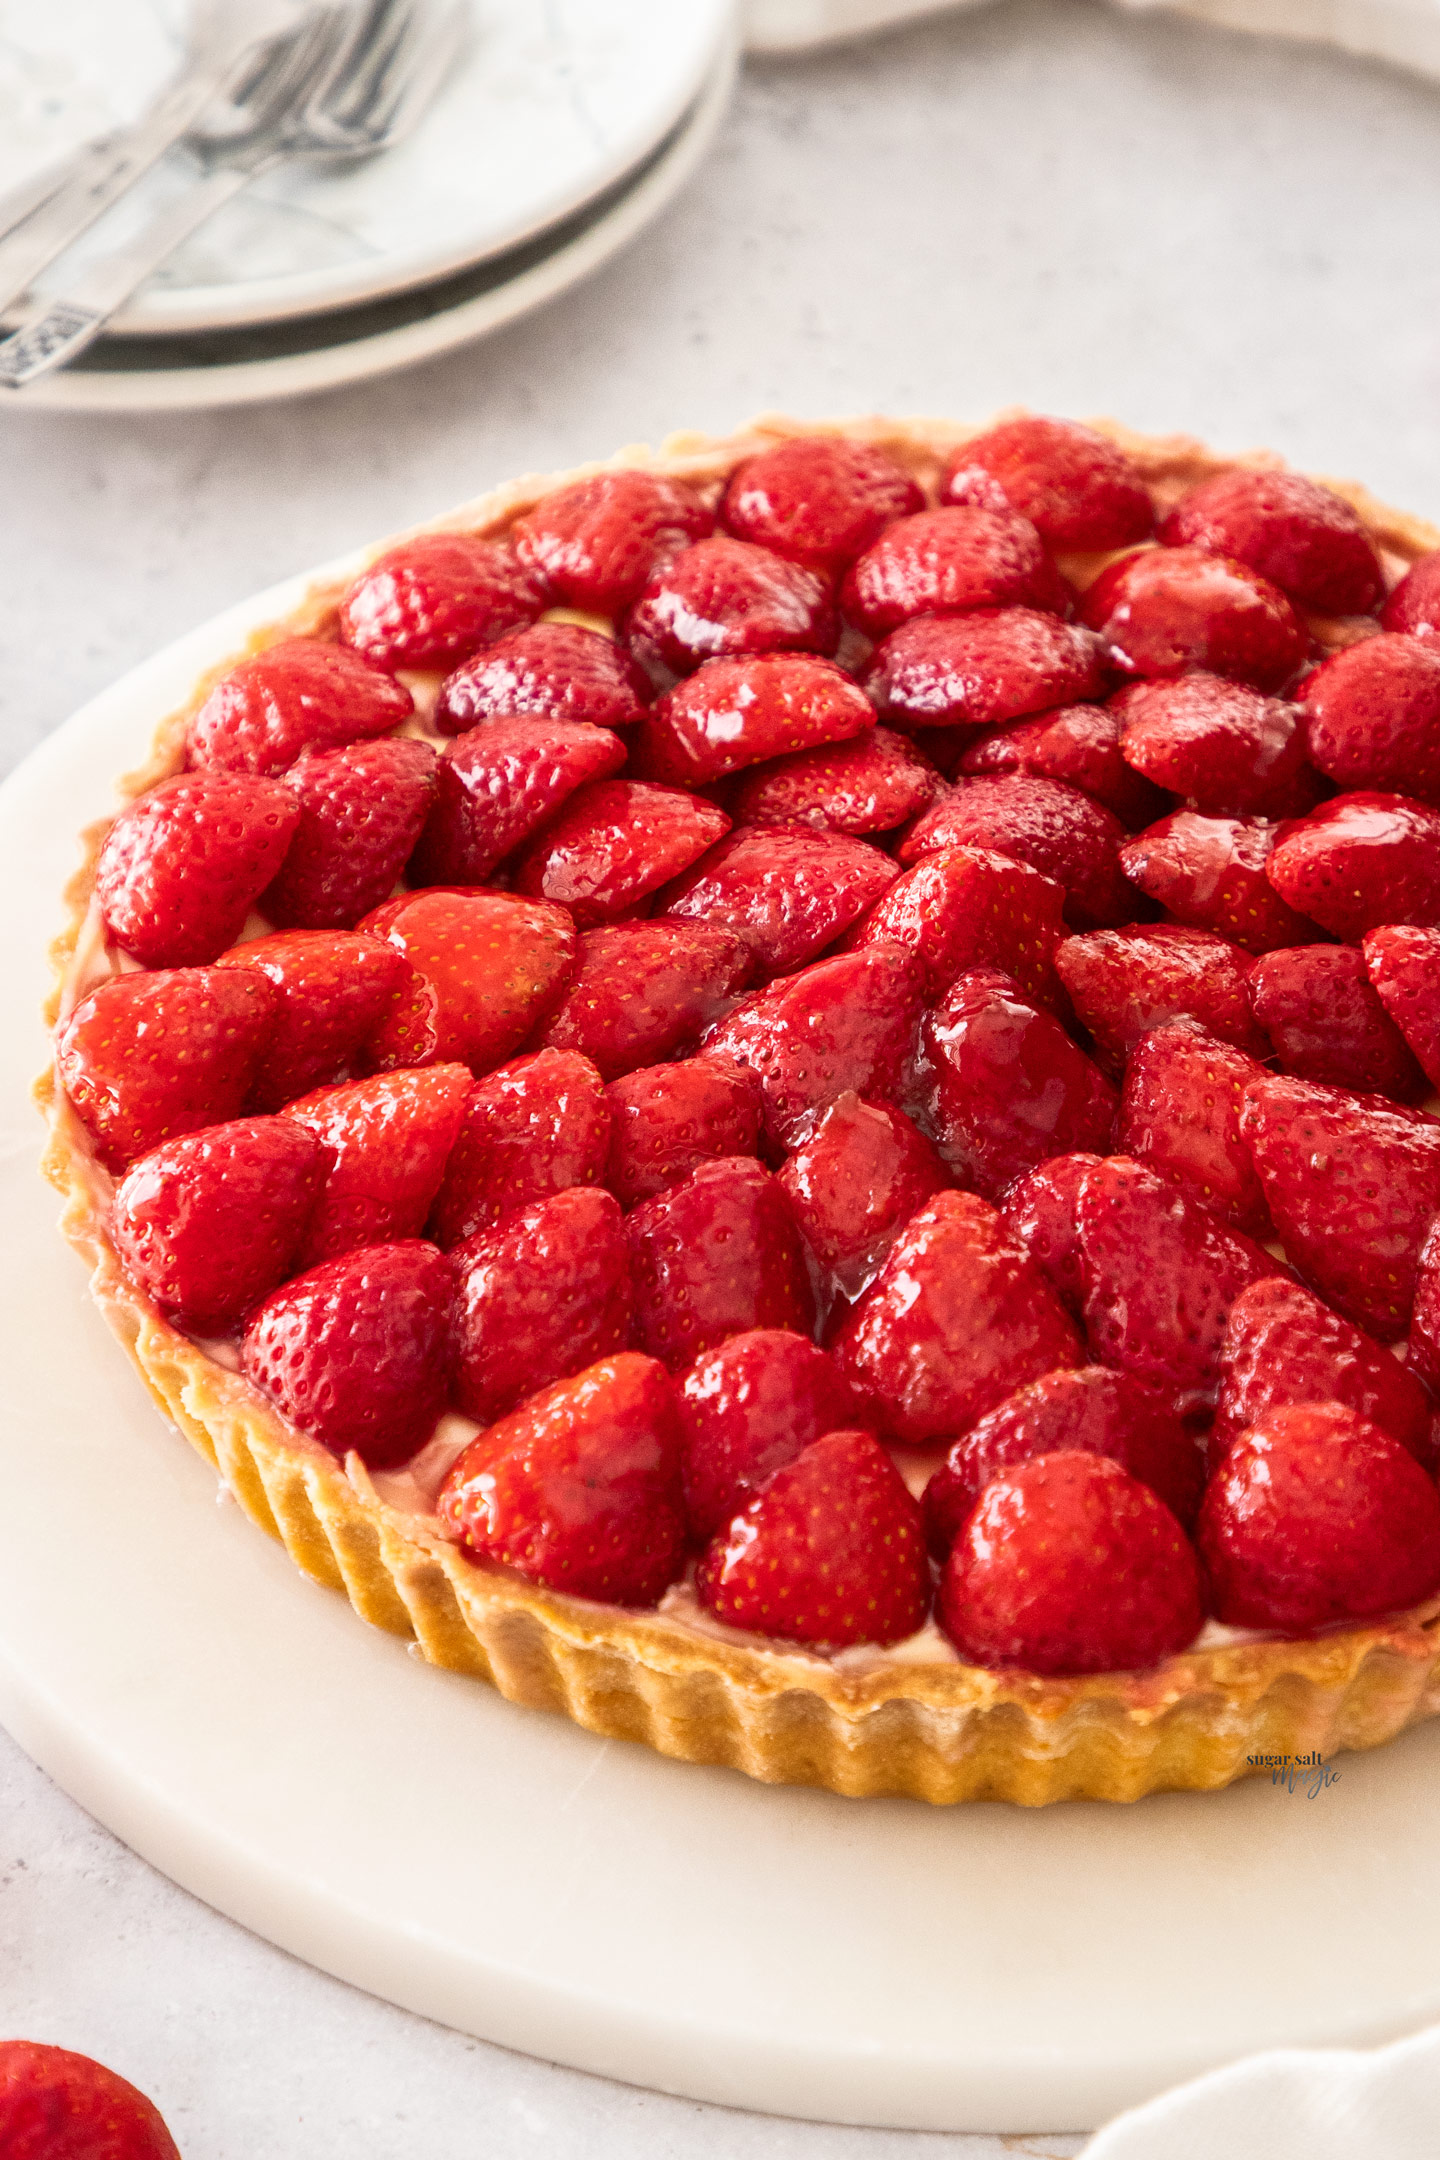 A tart topped with glazed strawberries.